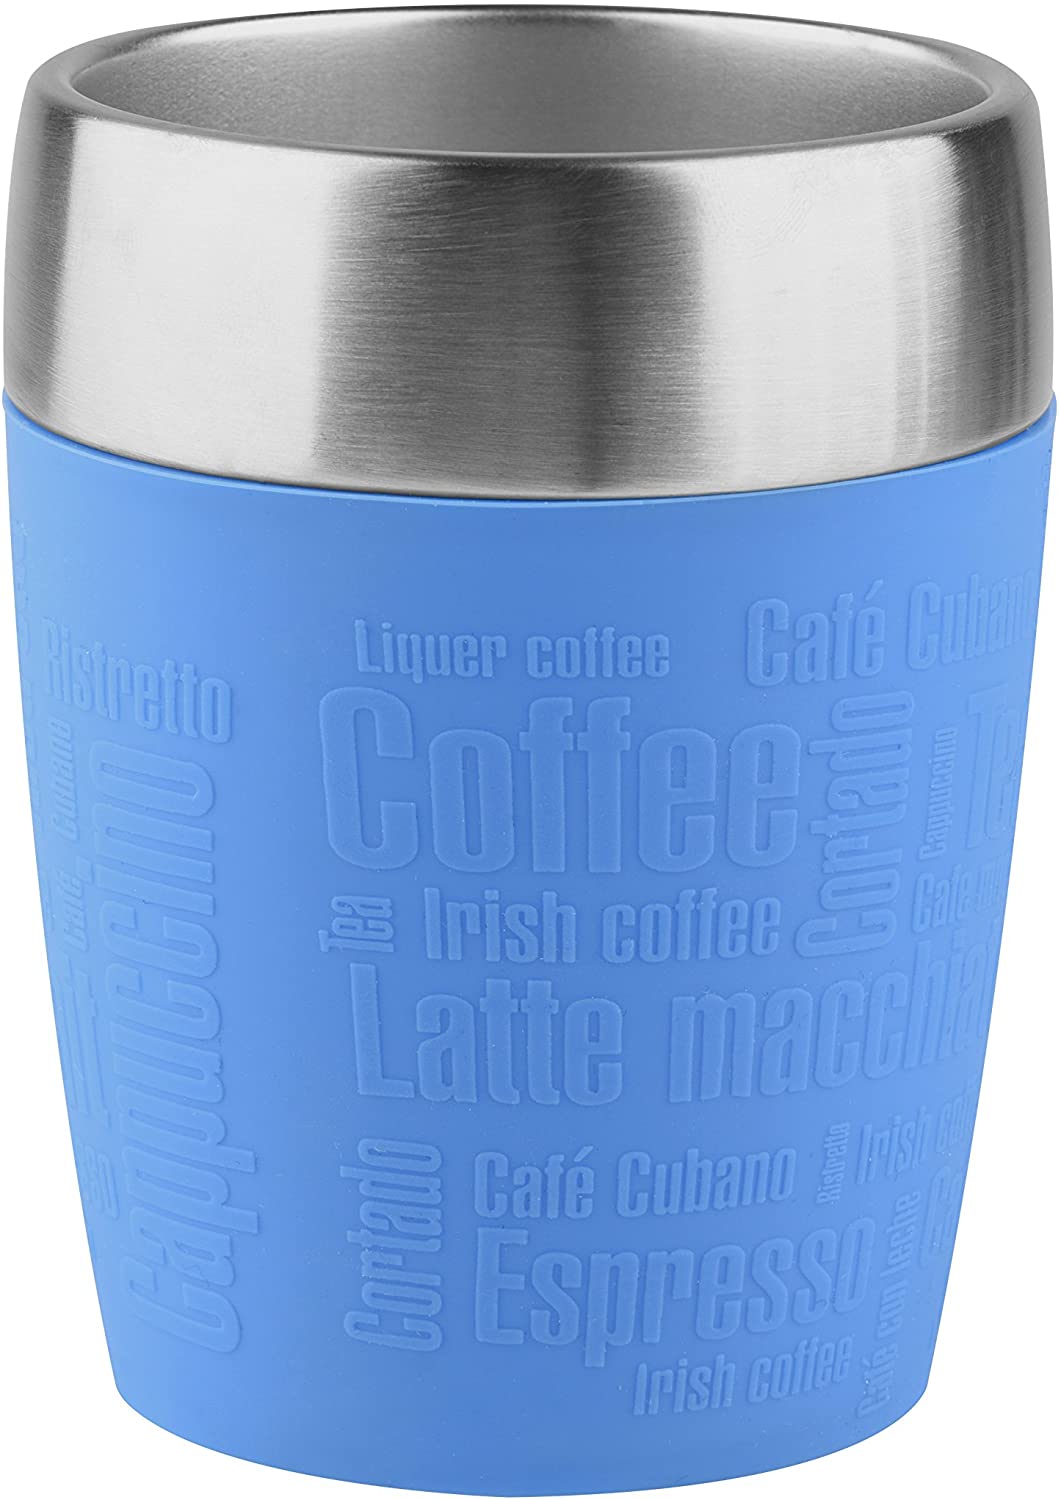 Tefal Travel Cup, Stainless Steel, Blue, 9.4 x 8.7 x 11.2 cm